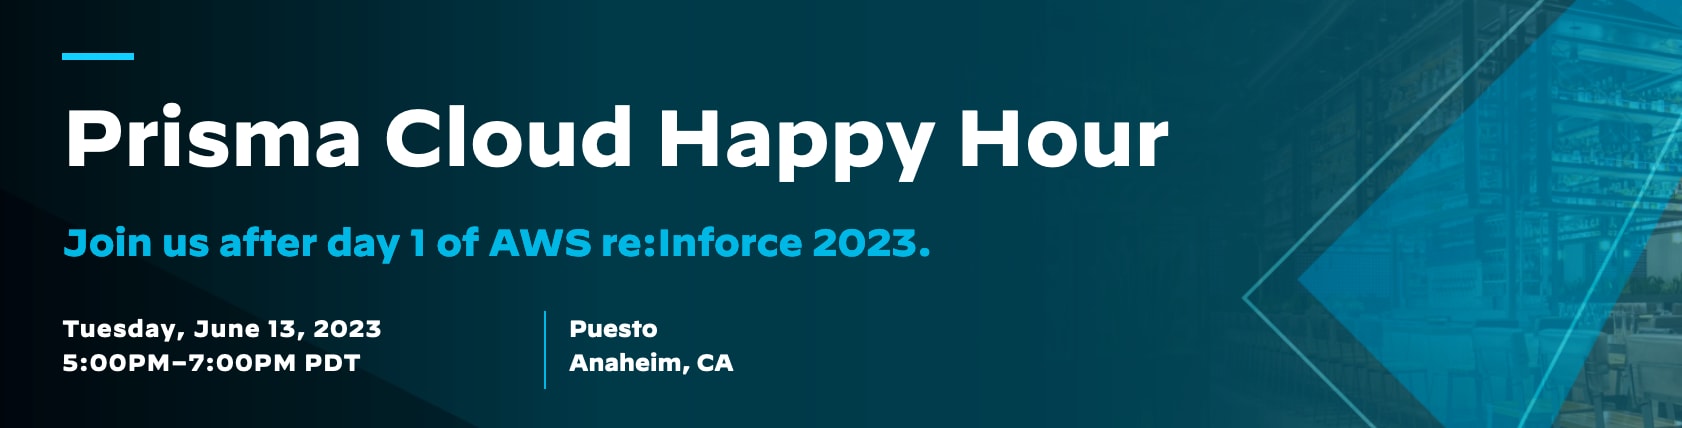 Come celebrate AWS re:Inforce with Prisma Cloud and cocktails, drinks, and delicious foods!